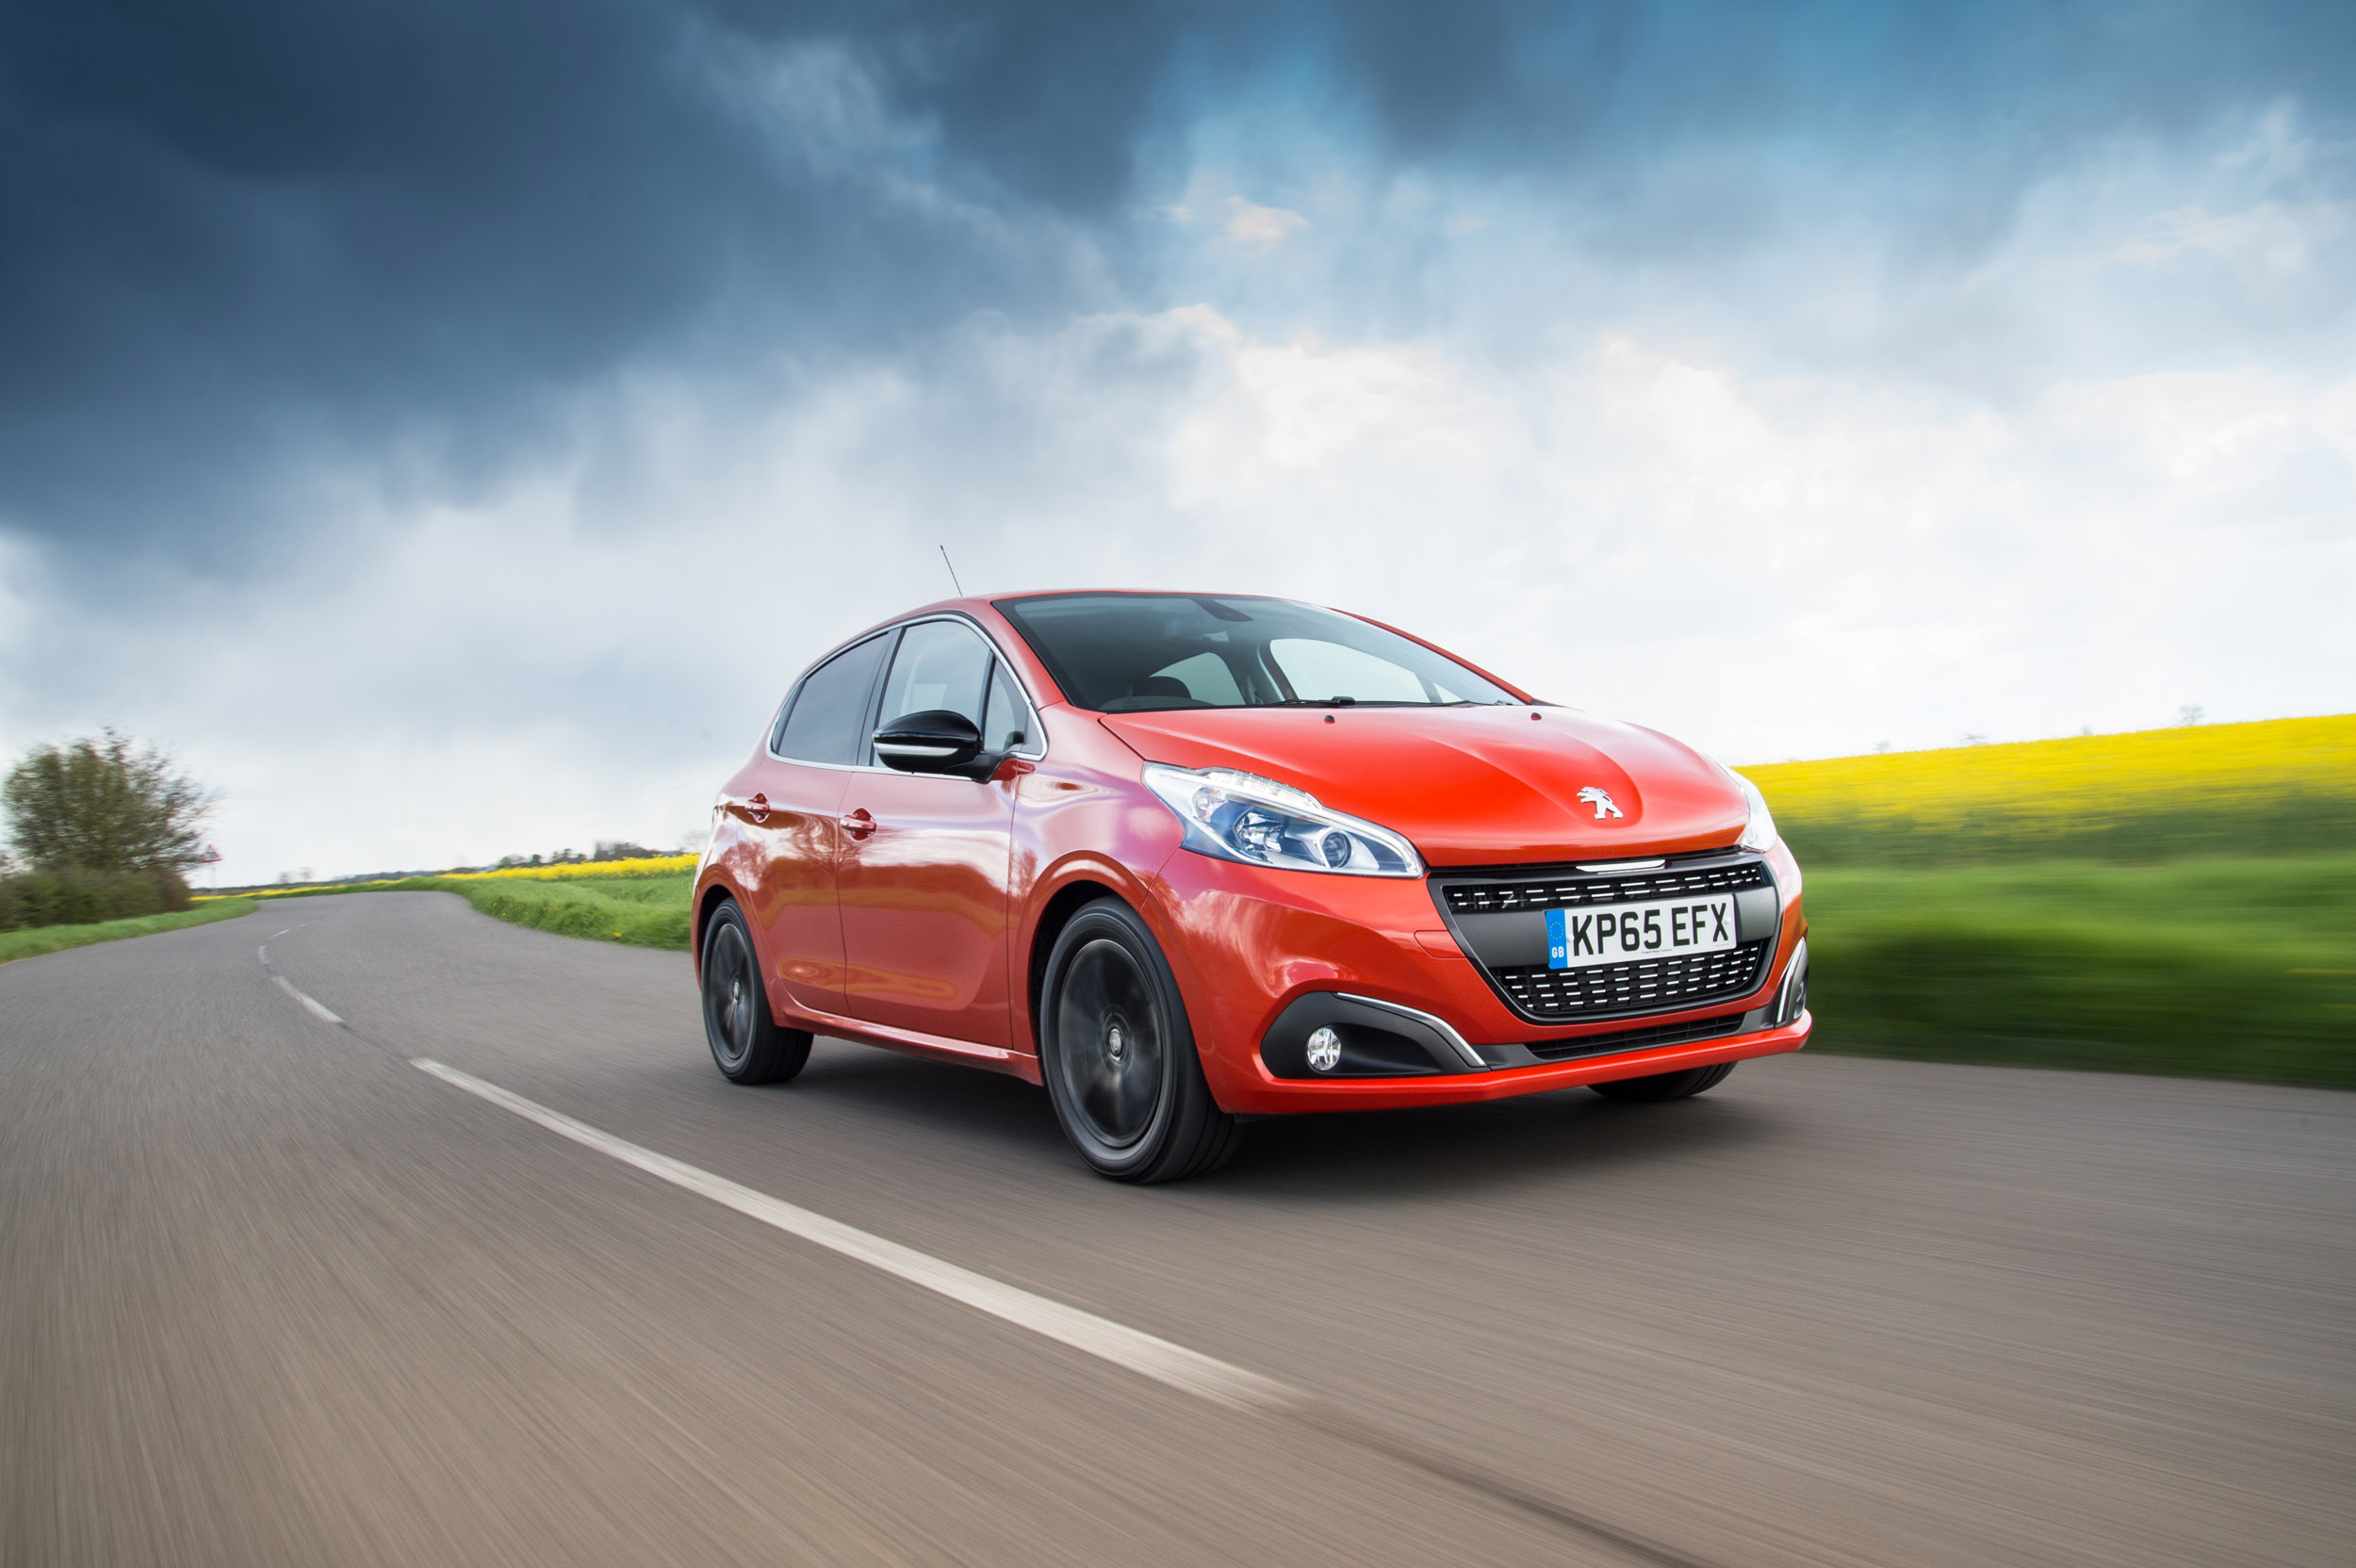 Peugeot 208 review - a supermini for keen drivers? - Peugeot 208